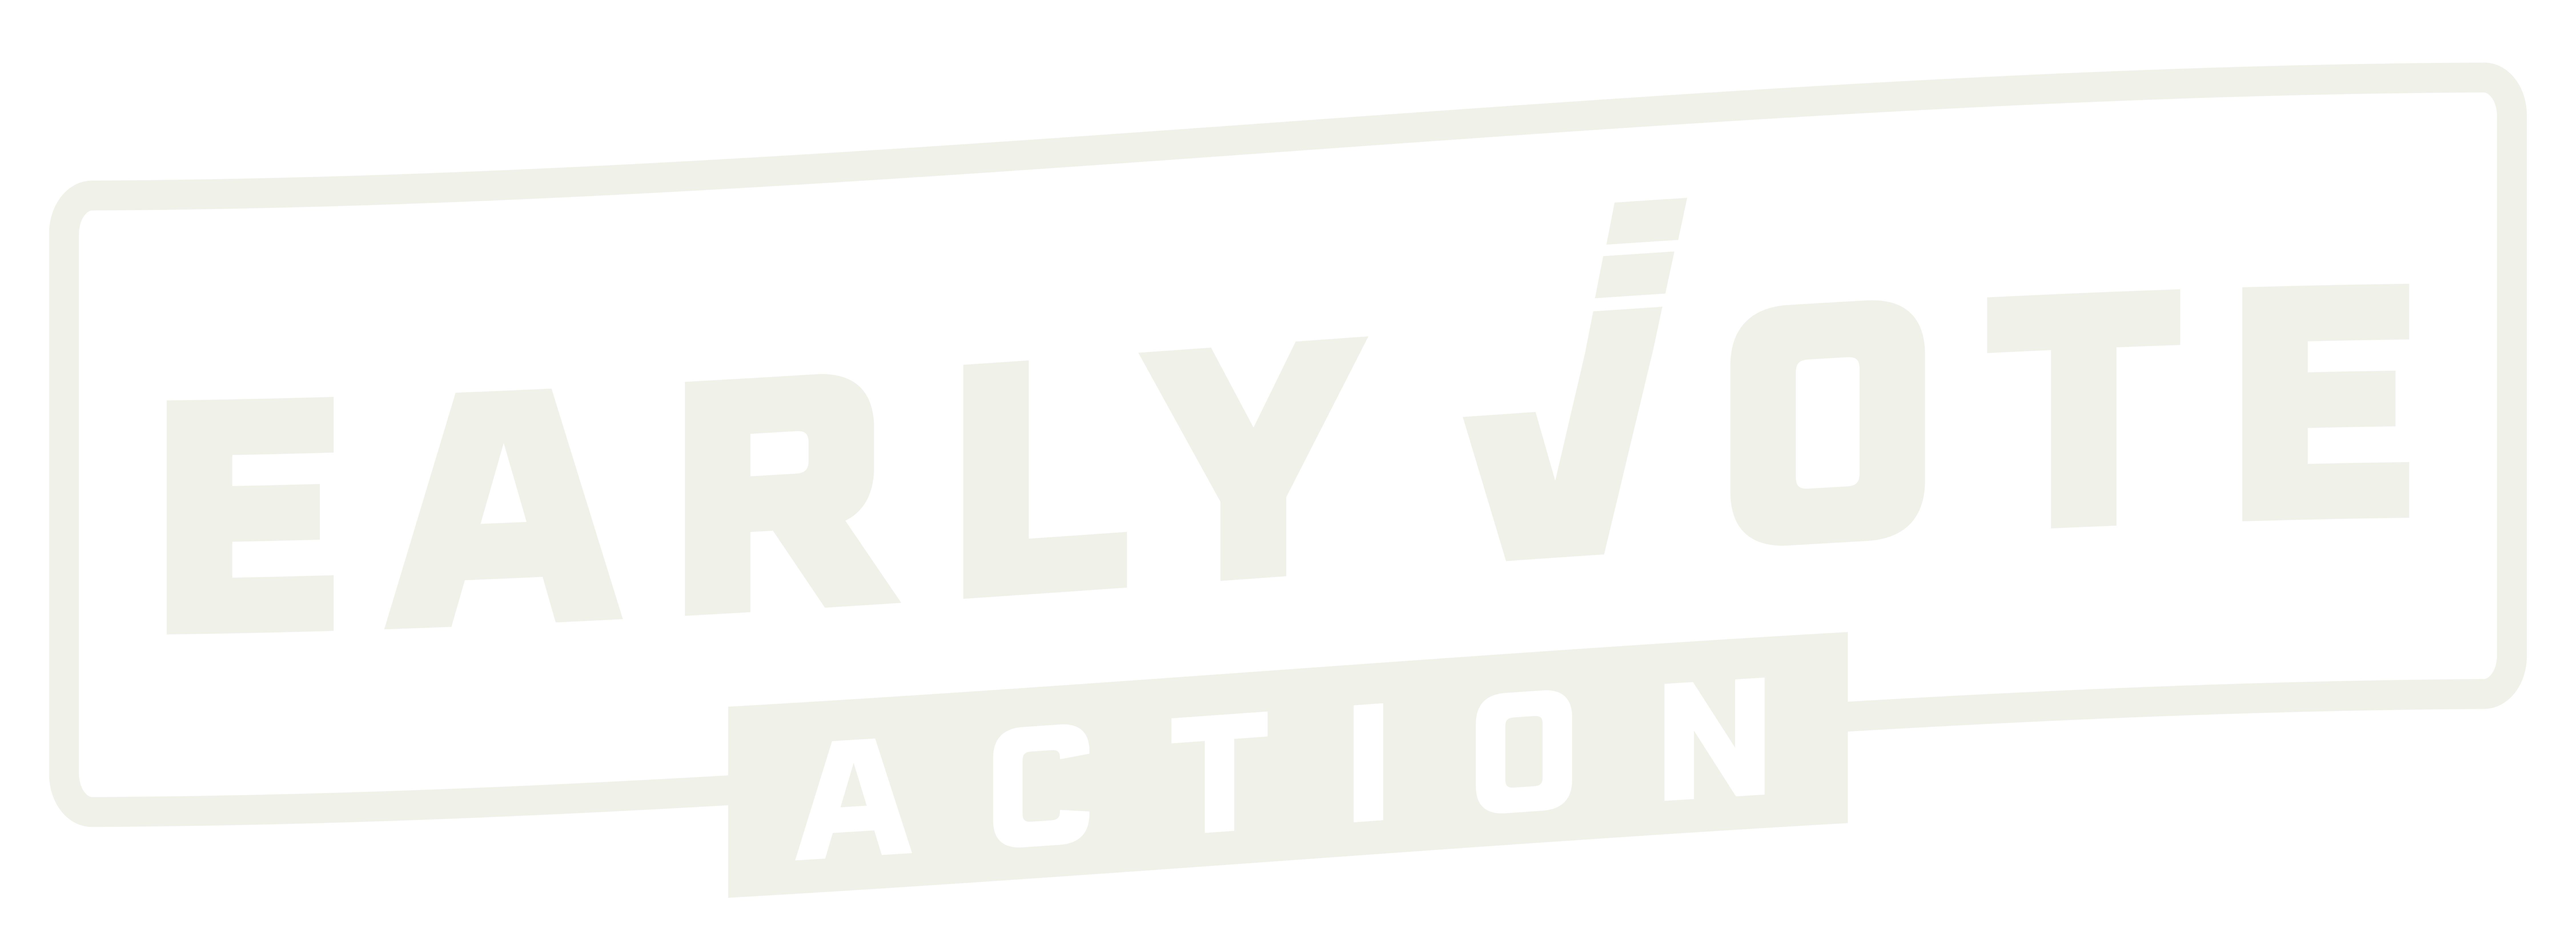 Early Vote Action